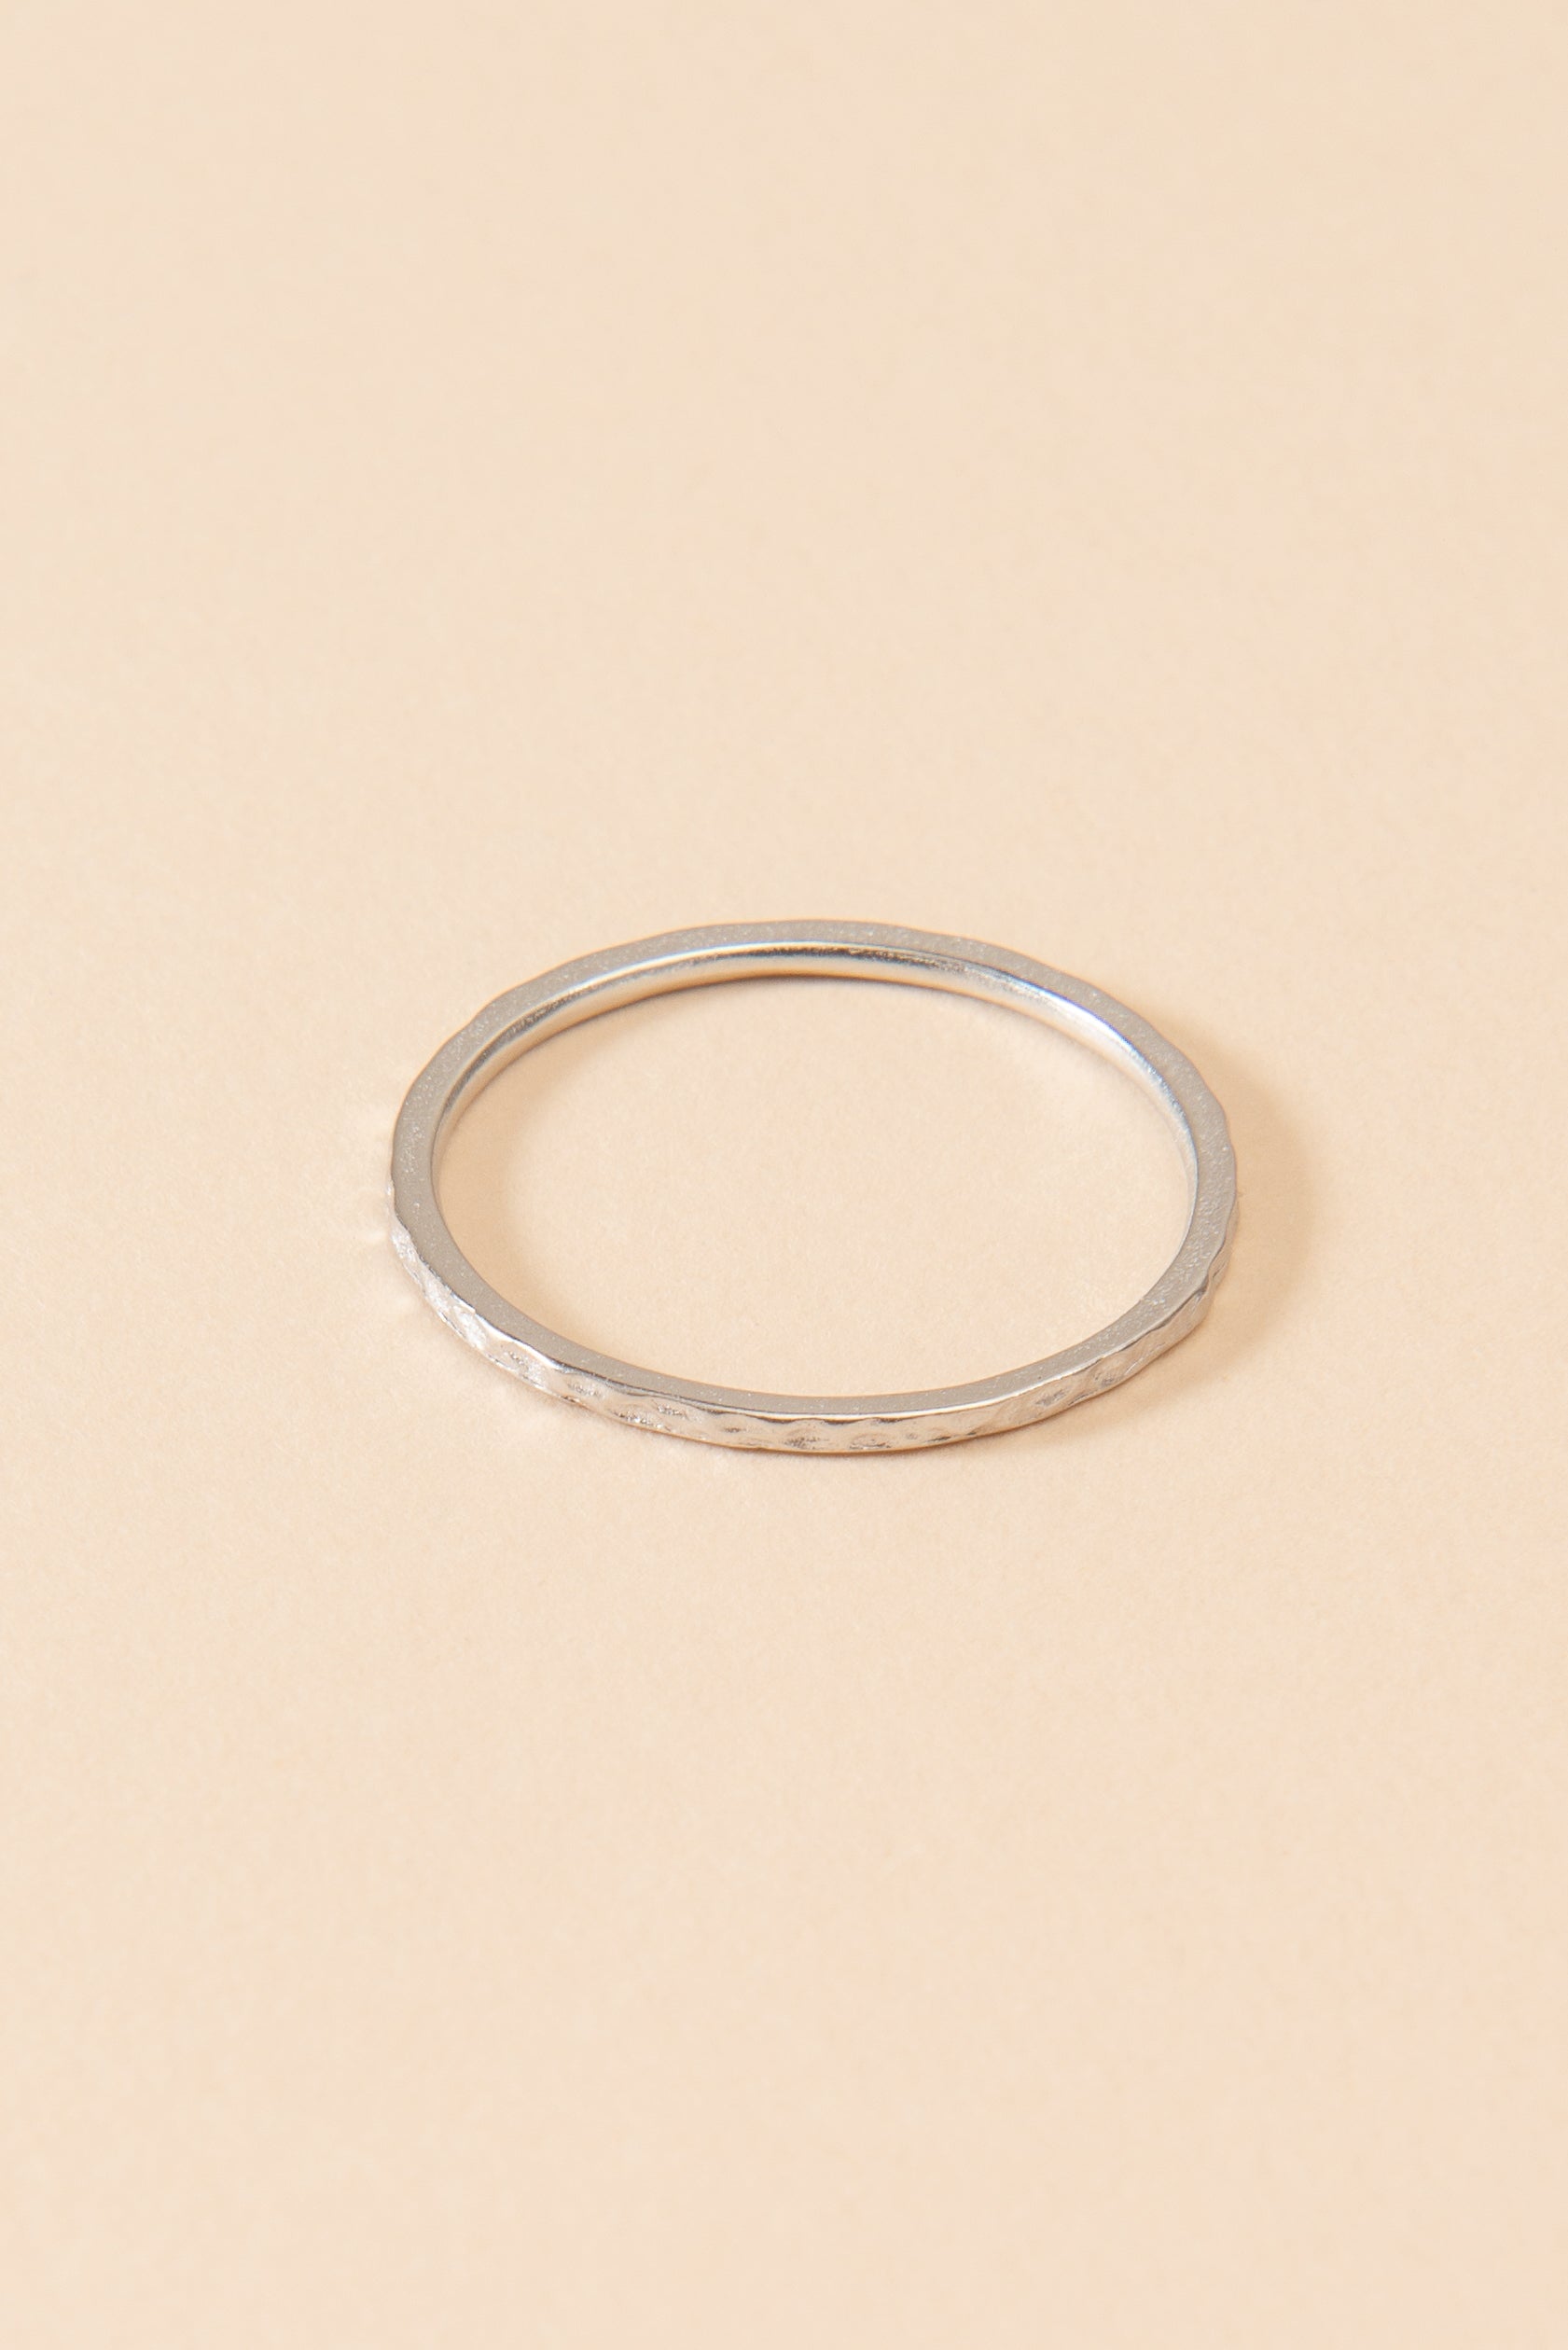 Dainty Single Textured Ring WOMEN'S RING Cove 6 Silver 